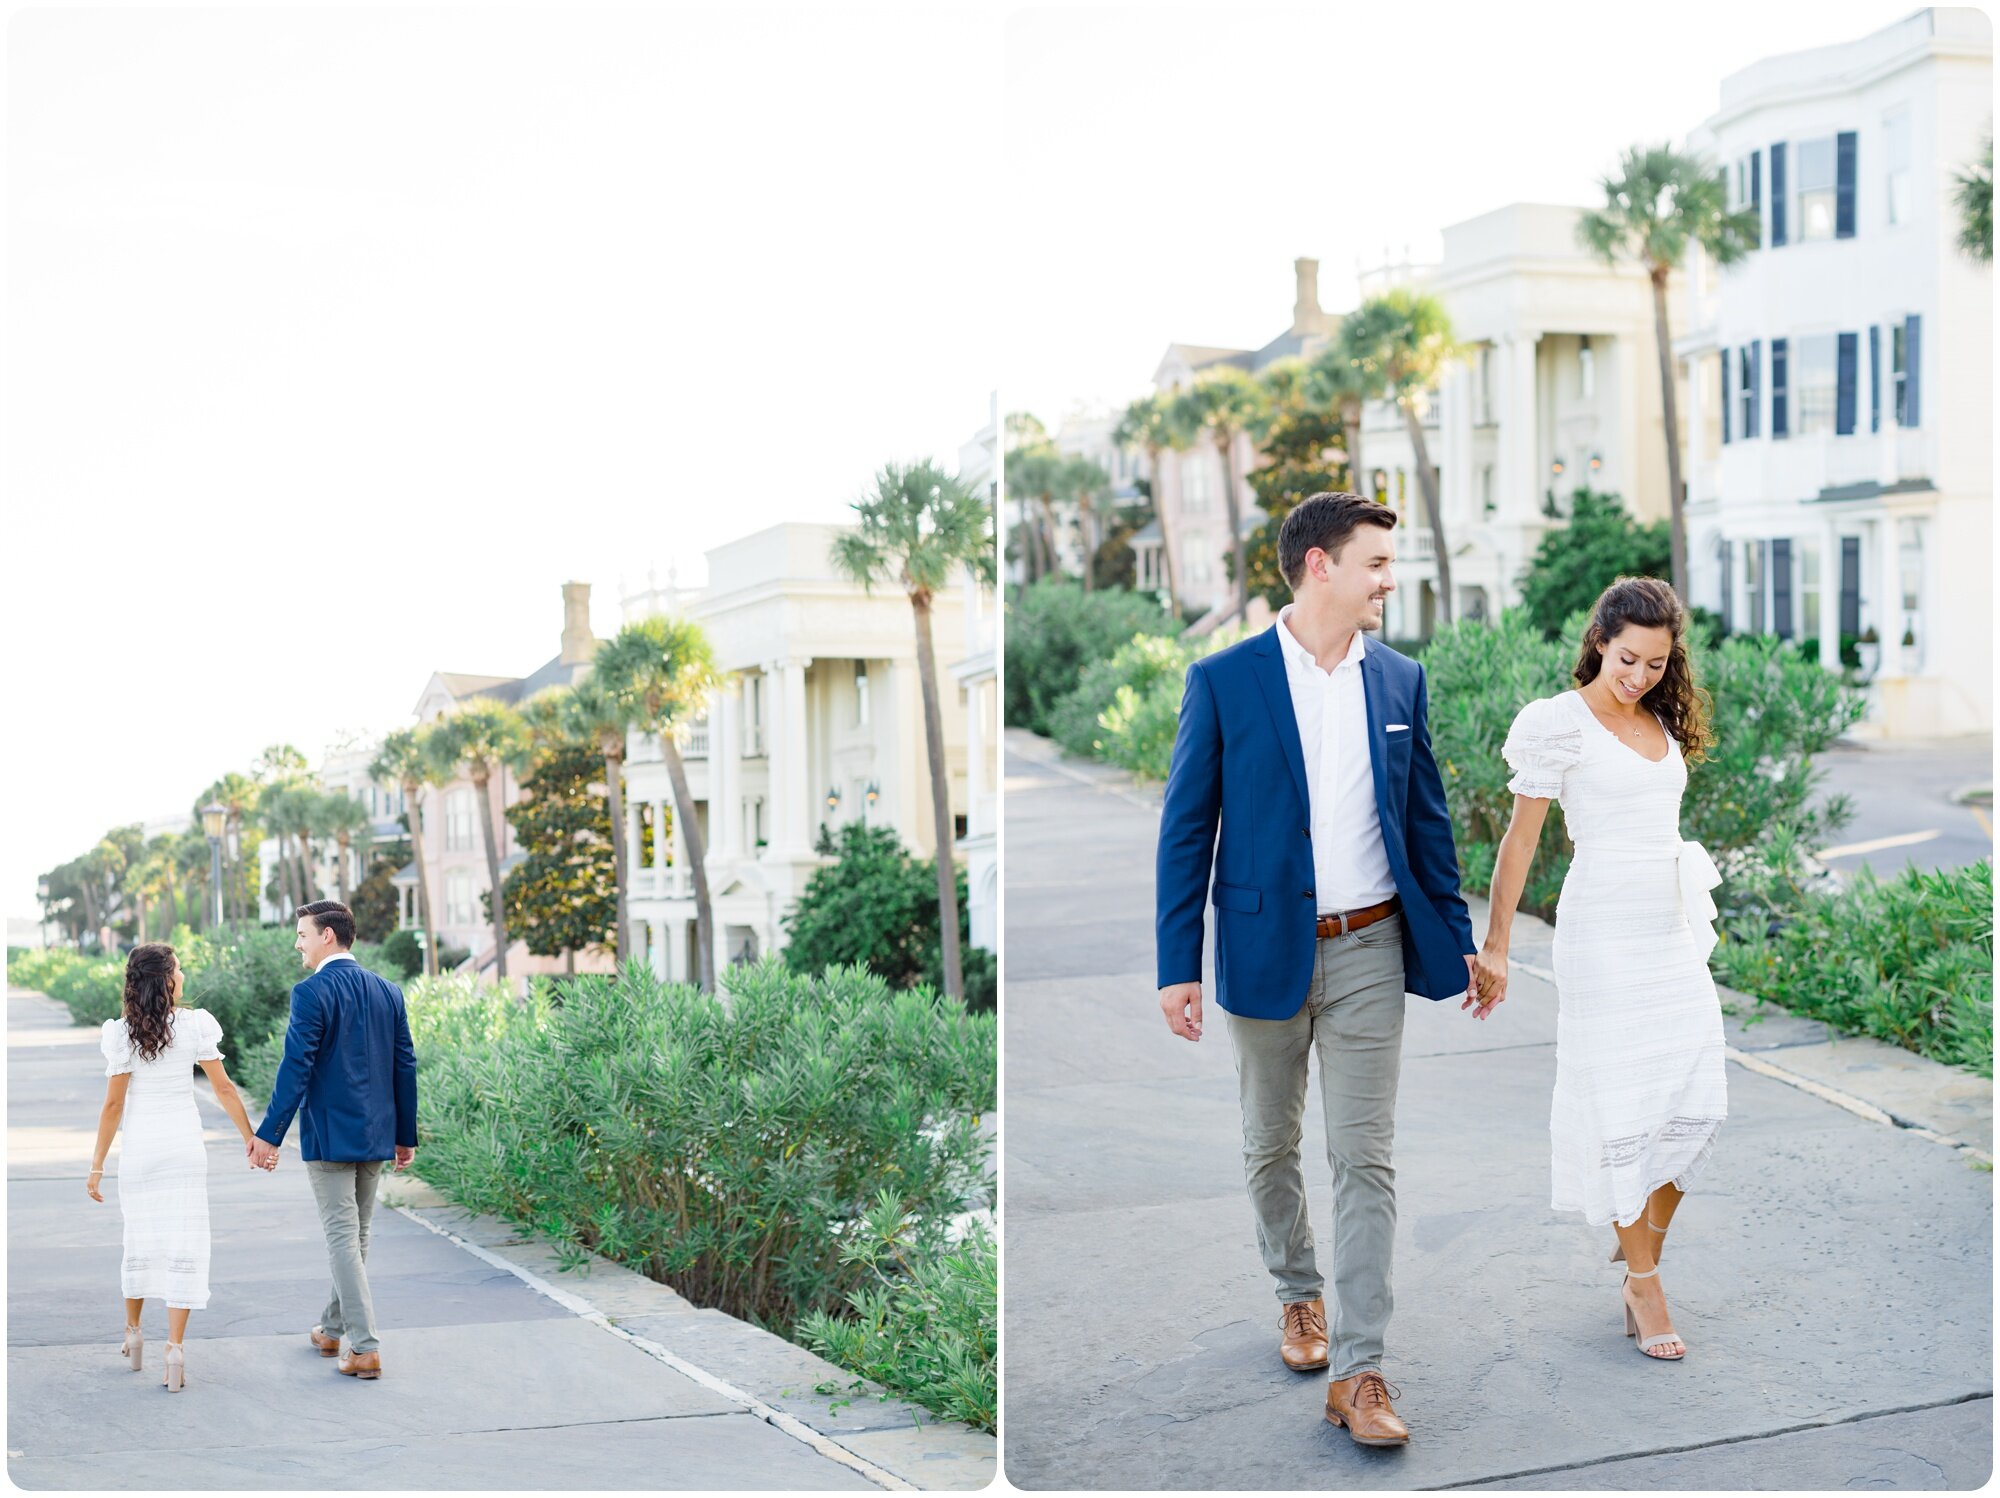 outdoor_engagement_session_candid_natural_charleston_destination_wedding_rainbow_row_colorful_kailee_dimeglio_photography_0010.jpg